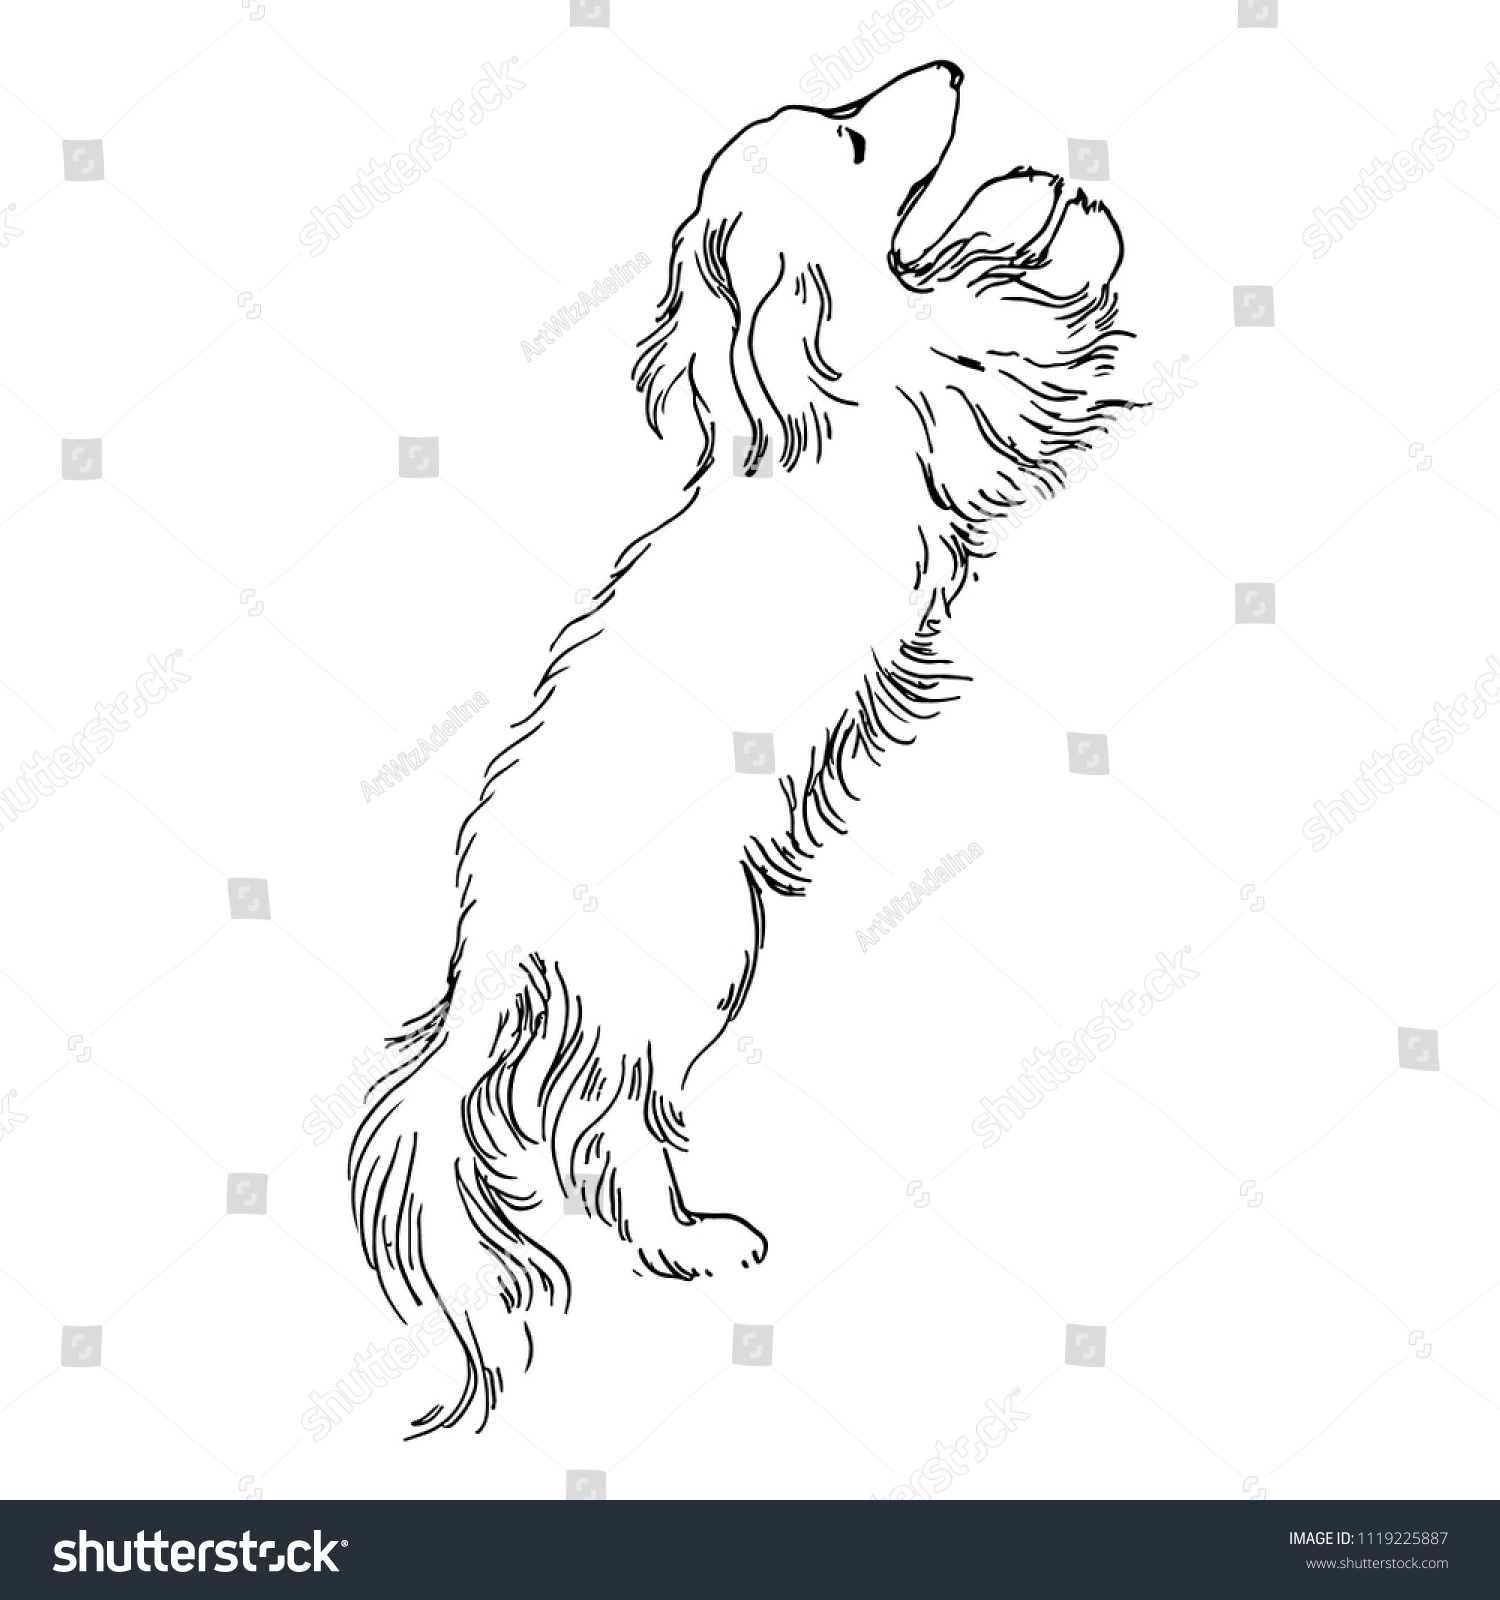 SVG of Cute realistic hand drawn dog longhaired dachshund in crosshatched vintage style. Vector illustration. svg